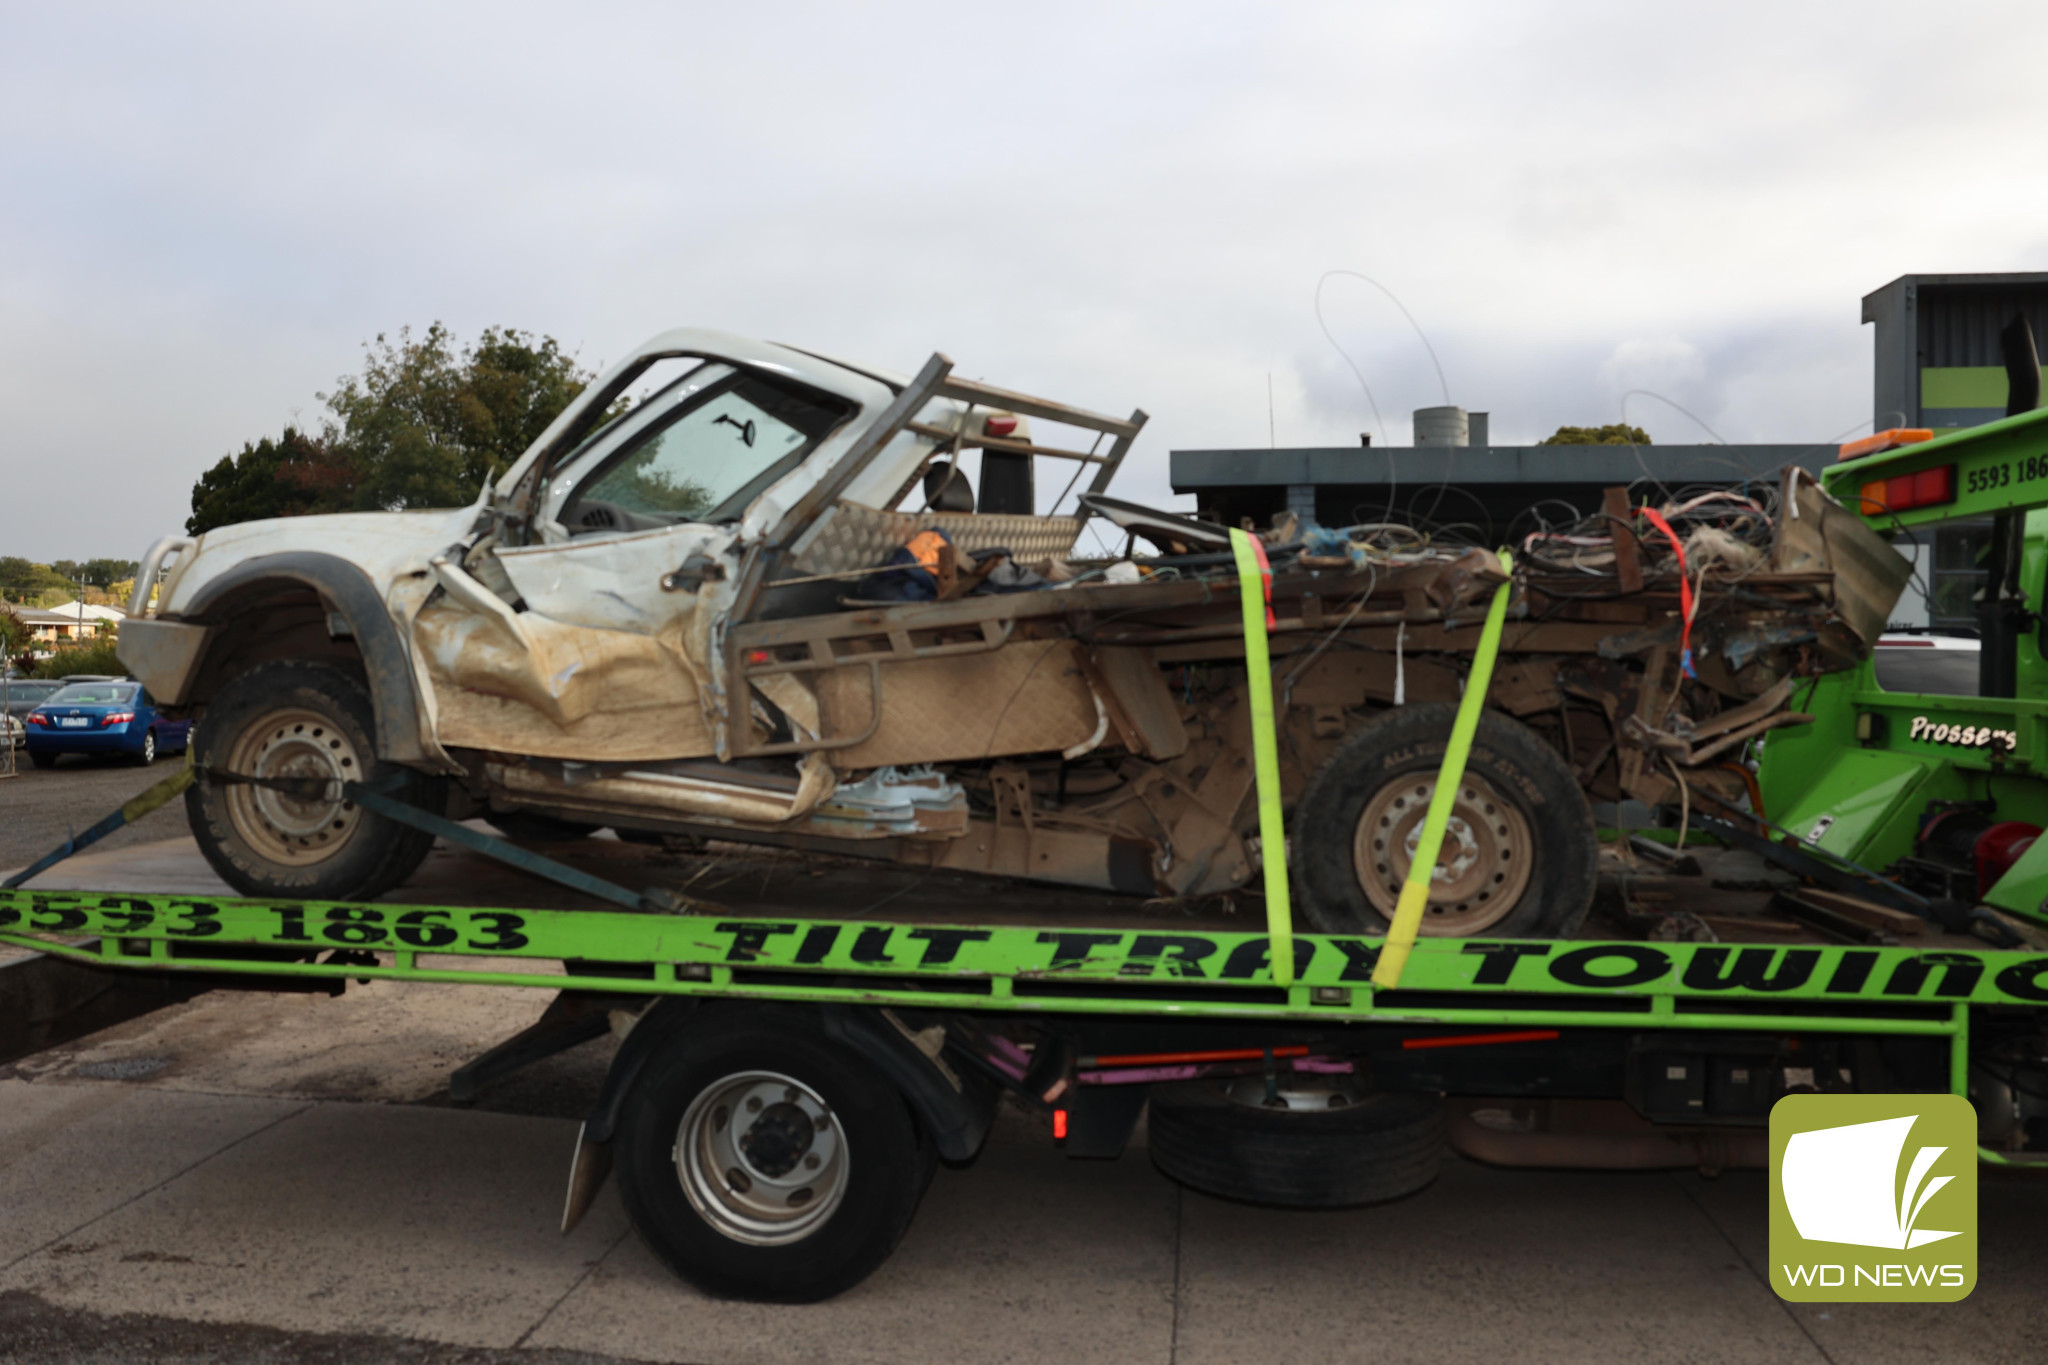 The collision left the ute a mangled wreck.